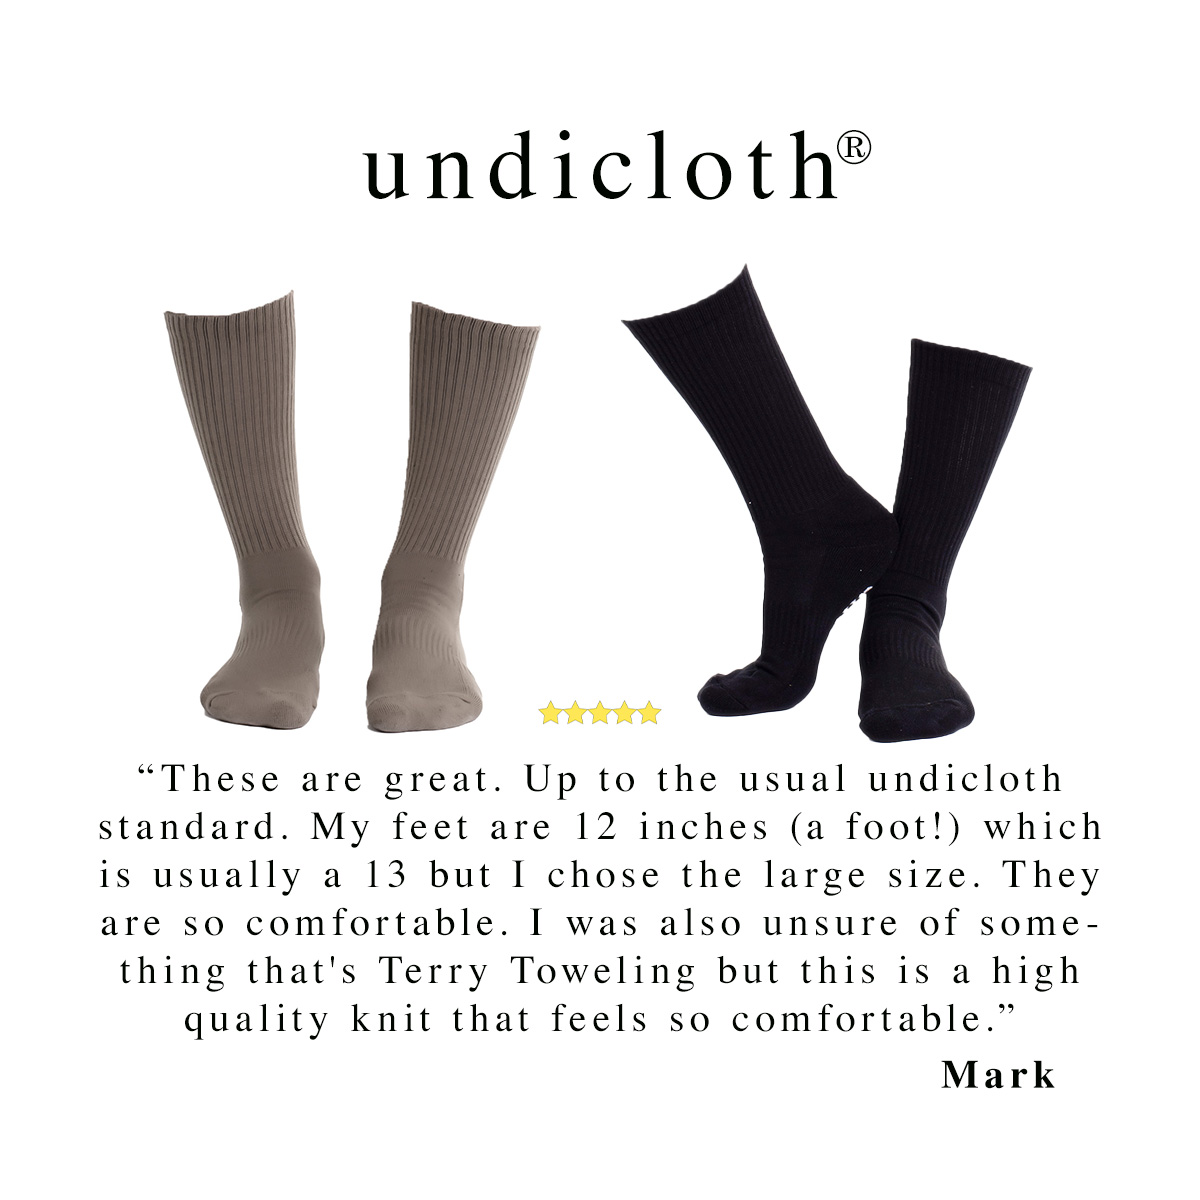 undicloth® crew socks come in both Black and Earth and have been rated 5 stars. Knitted in Australia 

#undicloth #socks #sockshop #underwear #madeinaustralia #smallbusiness #slowfashion #ethicalfashion #today #sydneysinnerwest